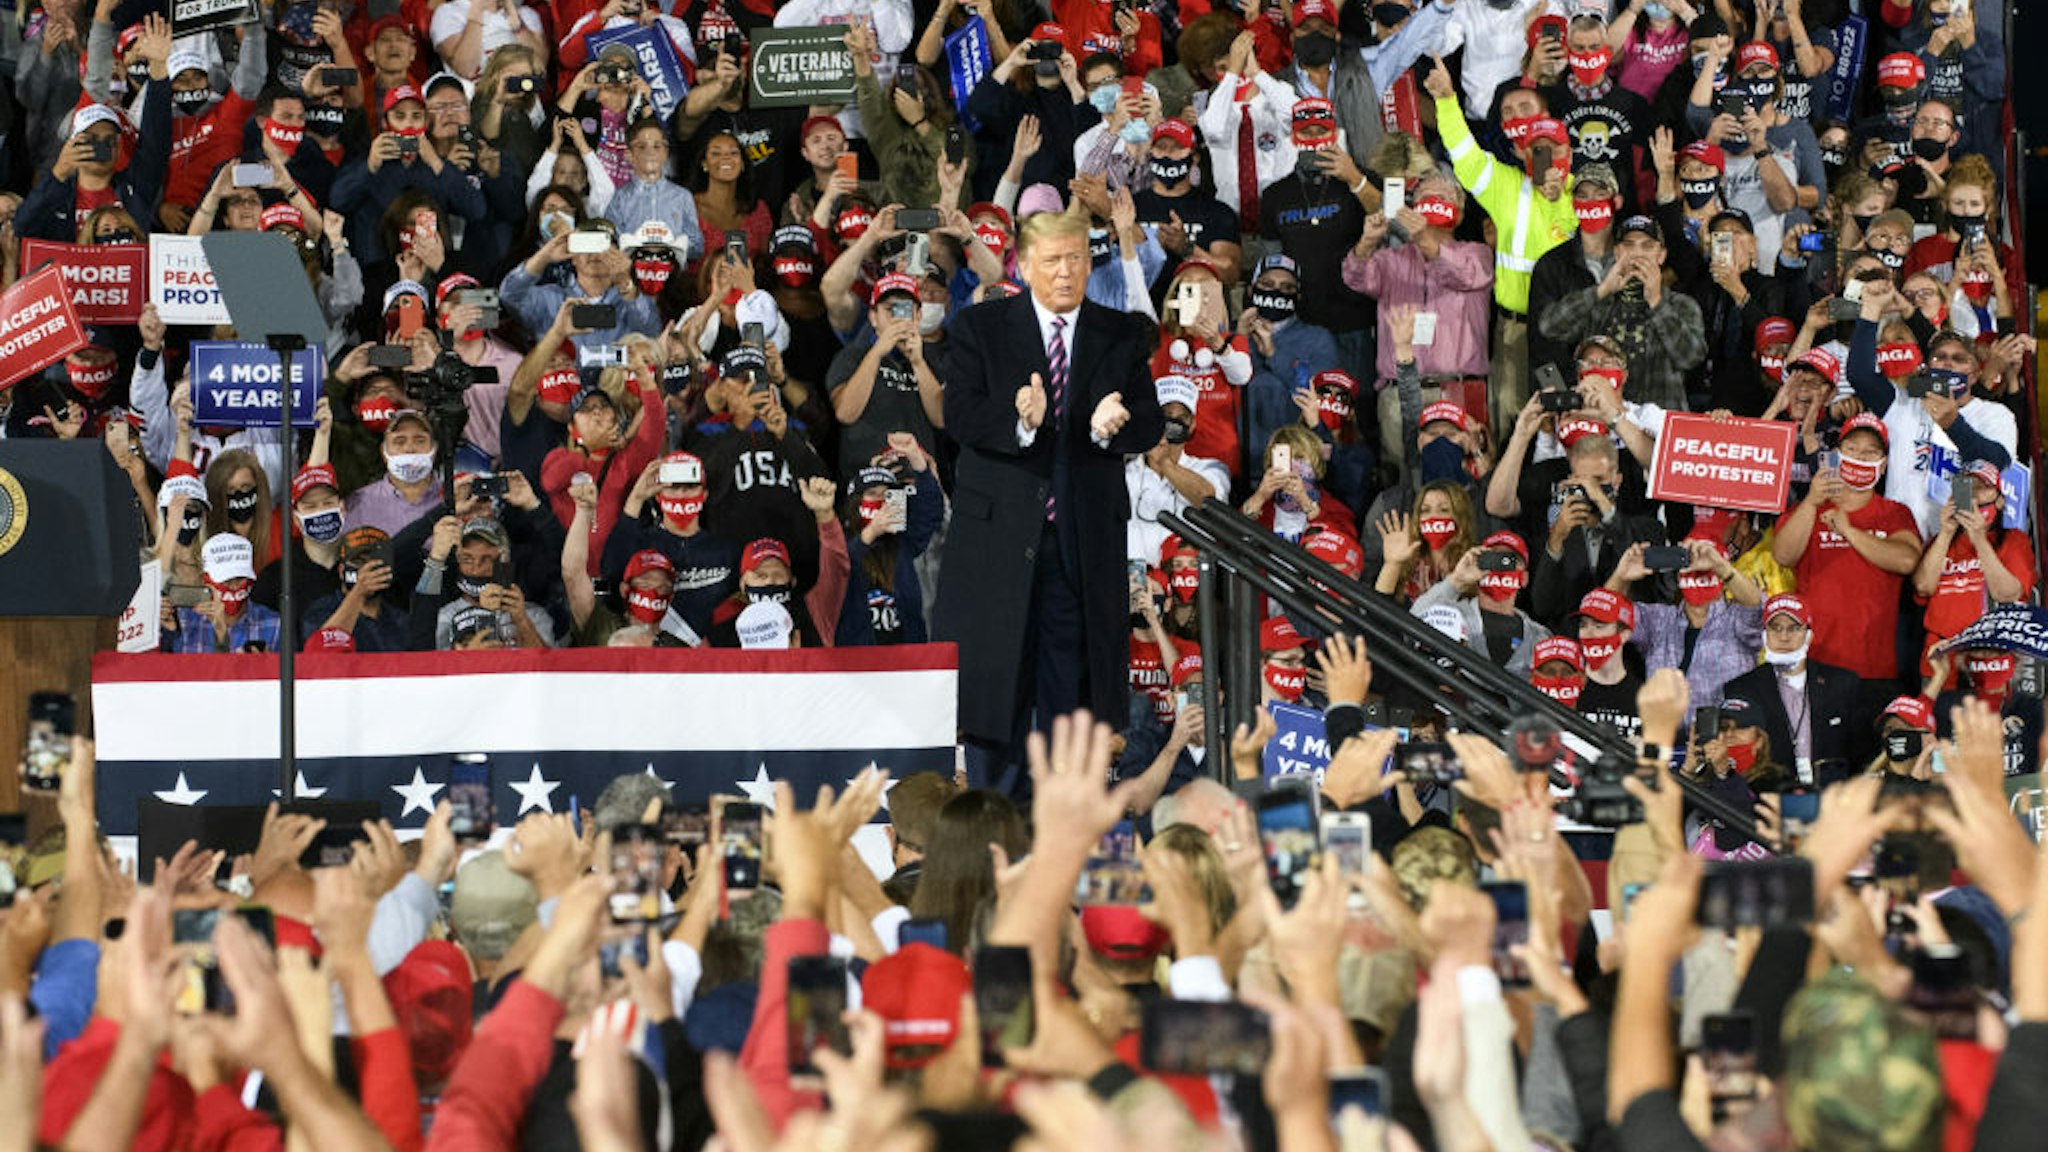 U.S. President Donald Trump claps during a 'Make America Great Again' campaign rally in Moon Township, Pennsylvania, U.S., on Tuesday, Sept. 22, 2020.